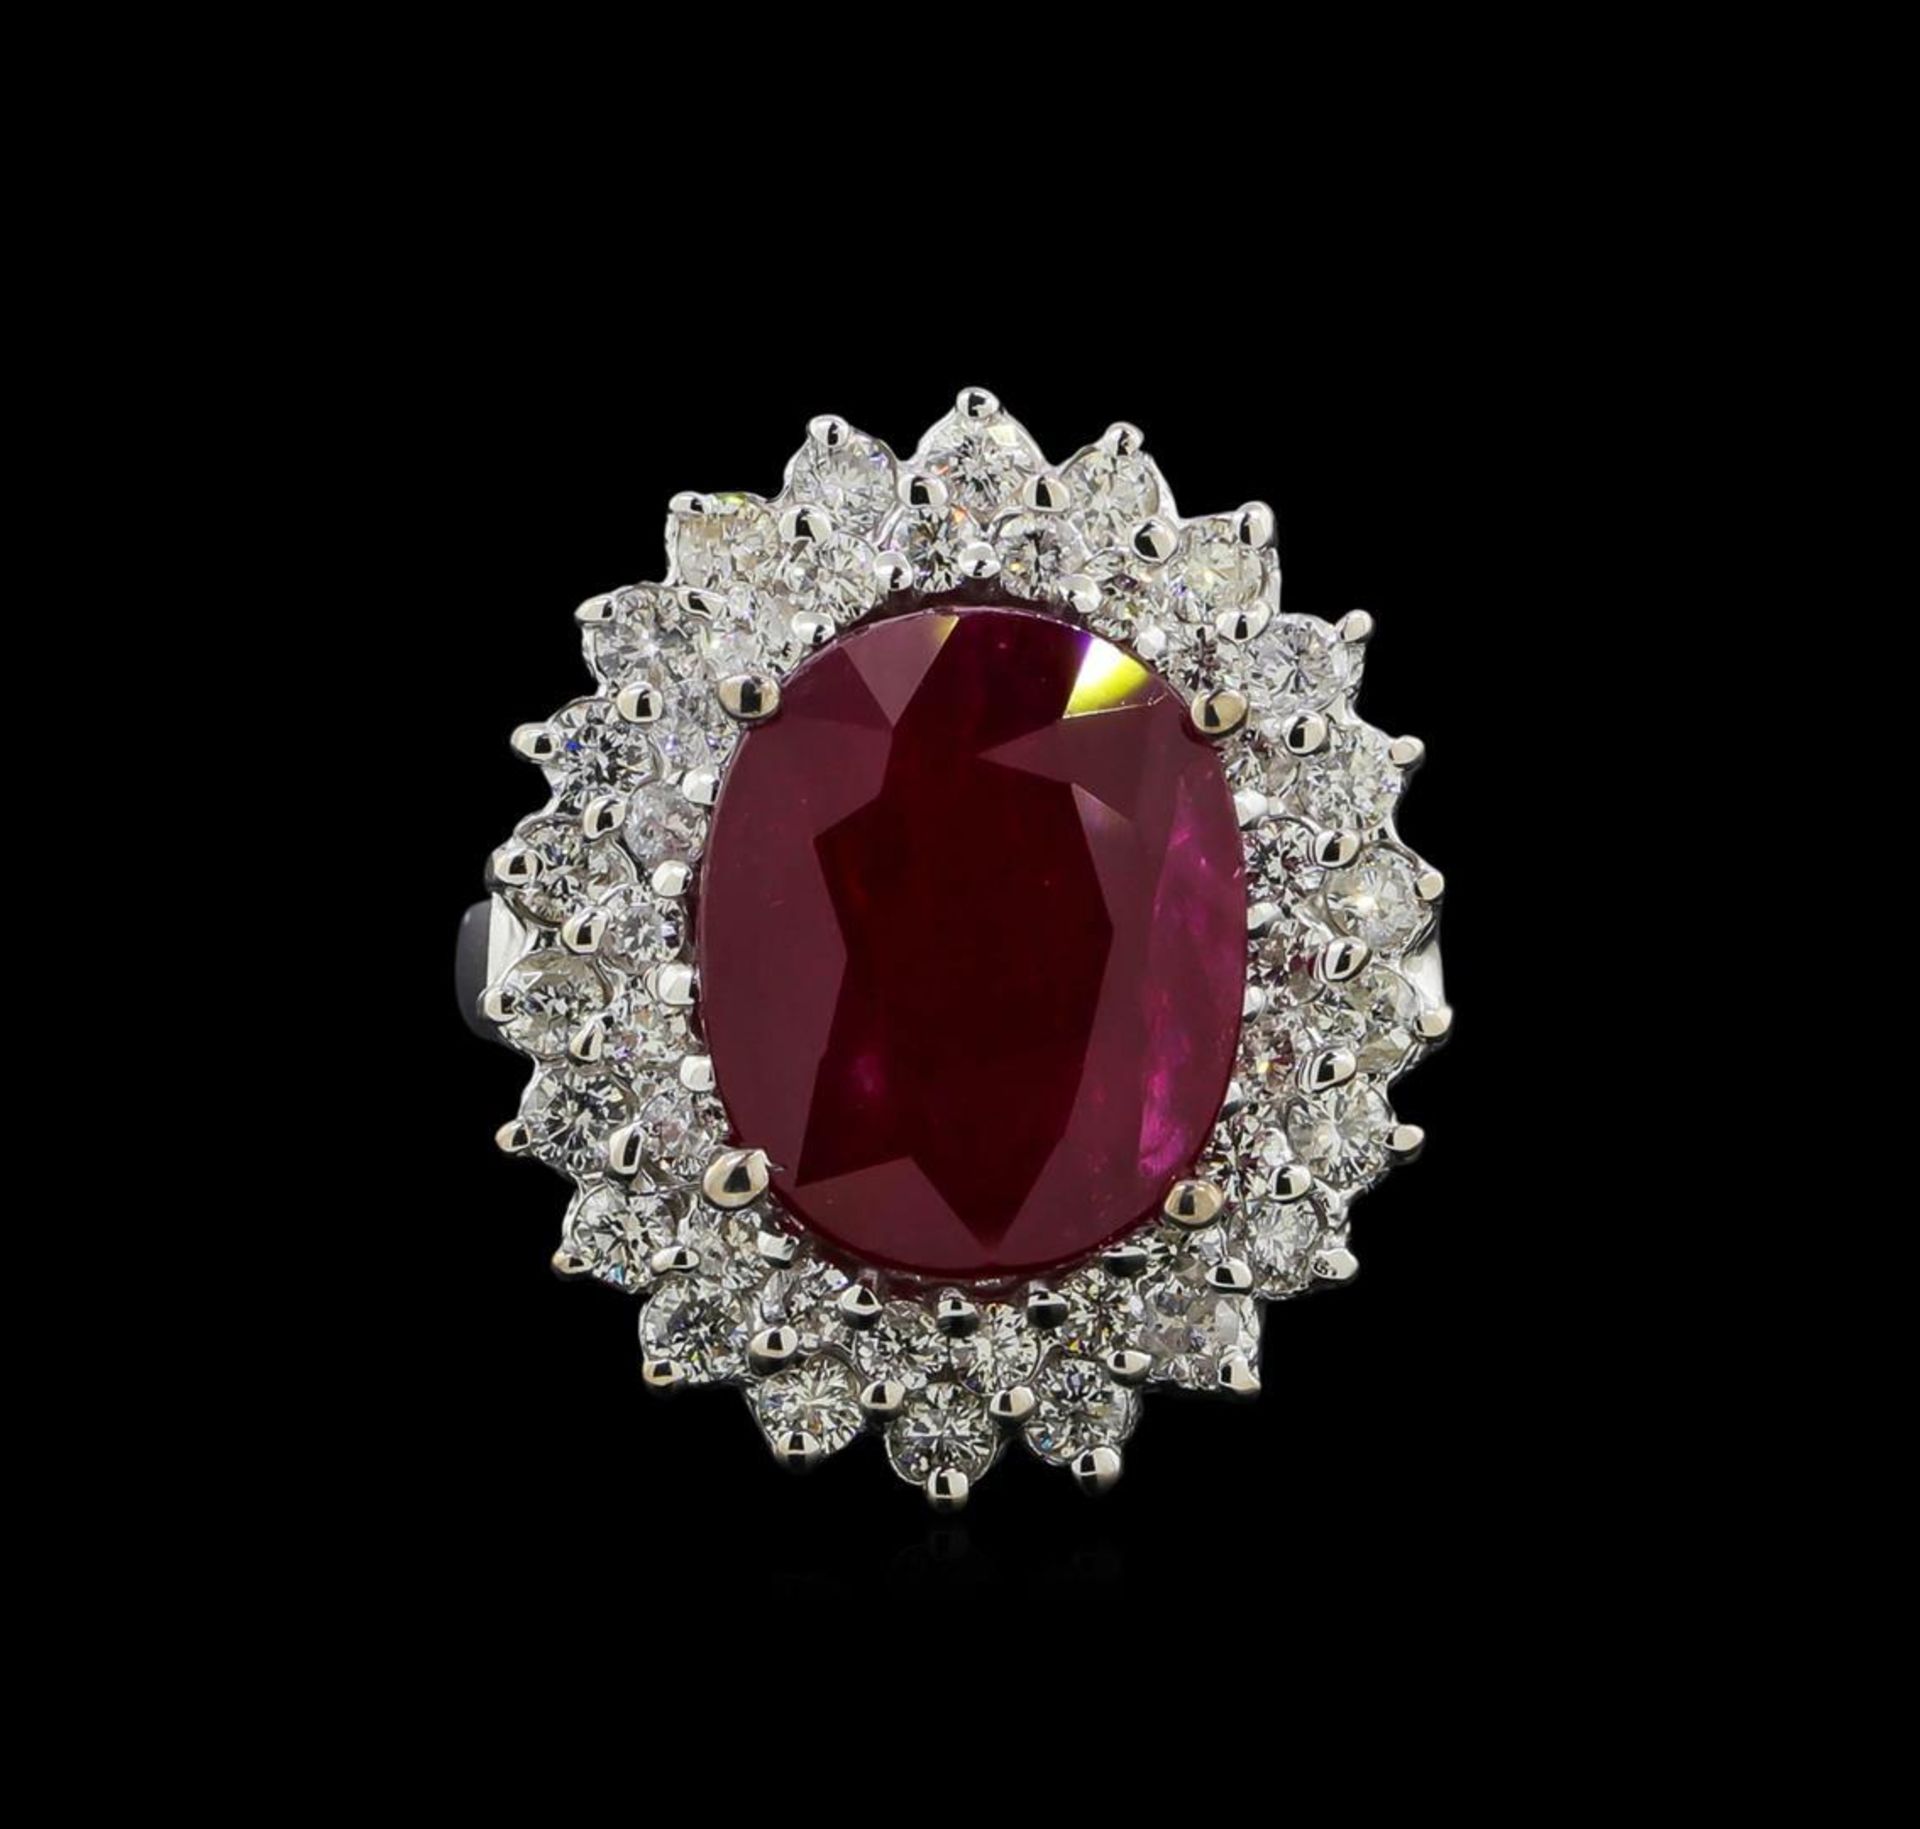 GIA Cert 6.53 ctw Ruby and Diamond Ring - 14KT White Gold - Image 2 of 6